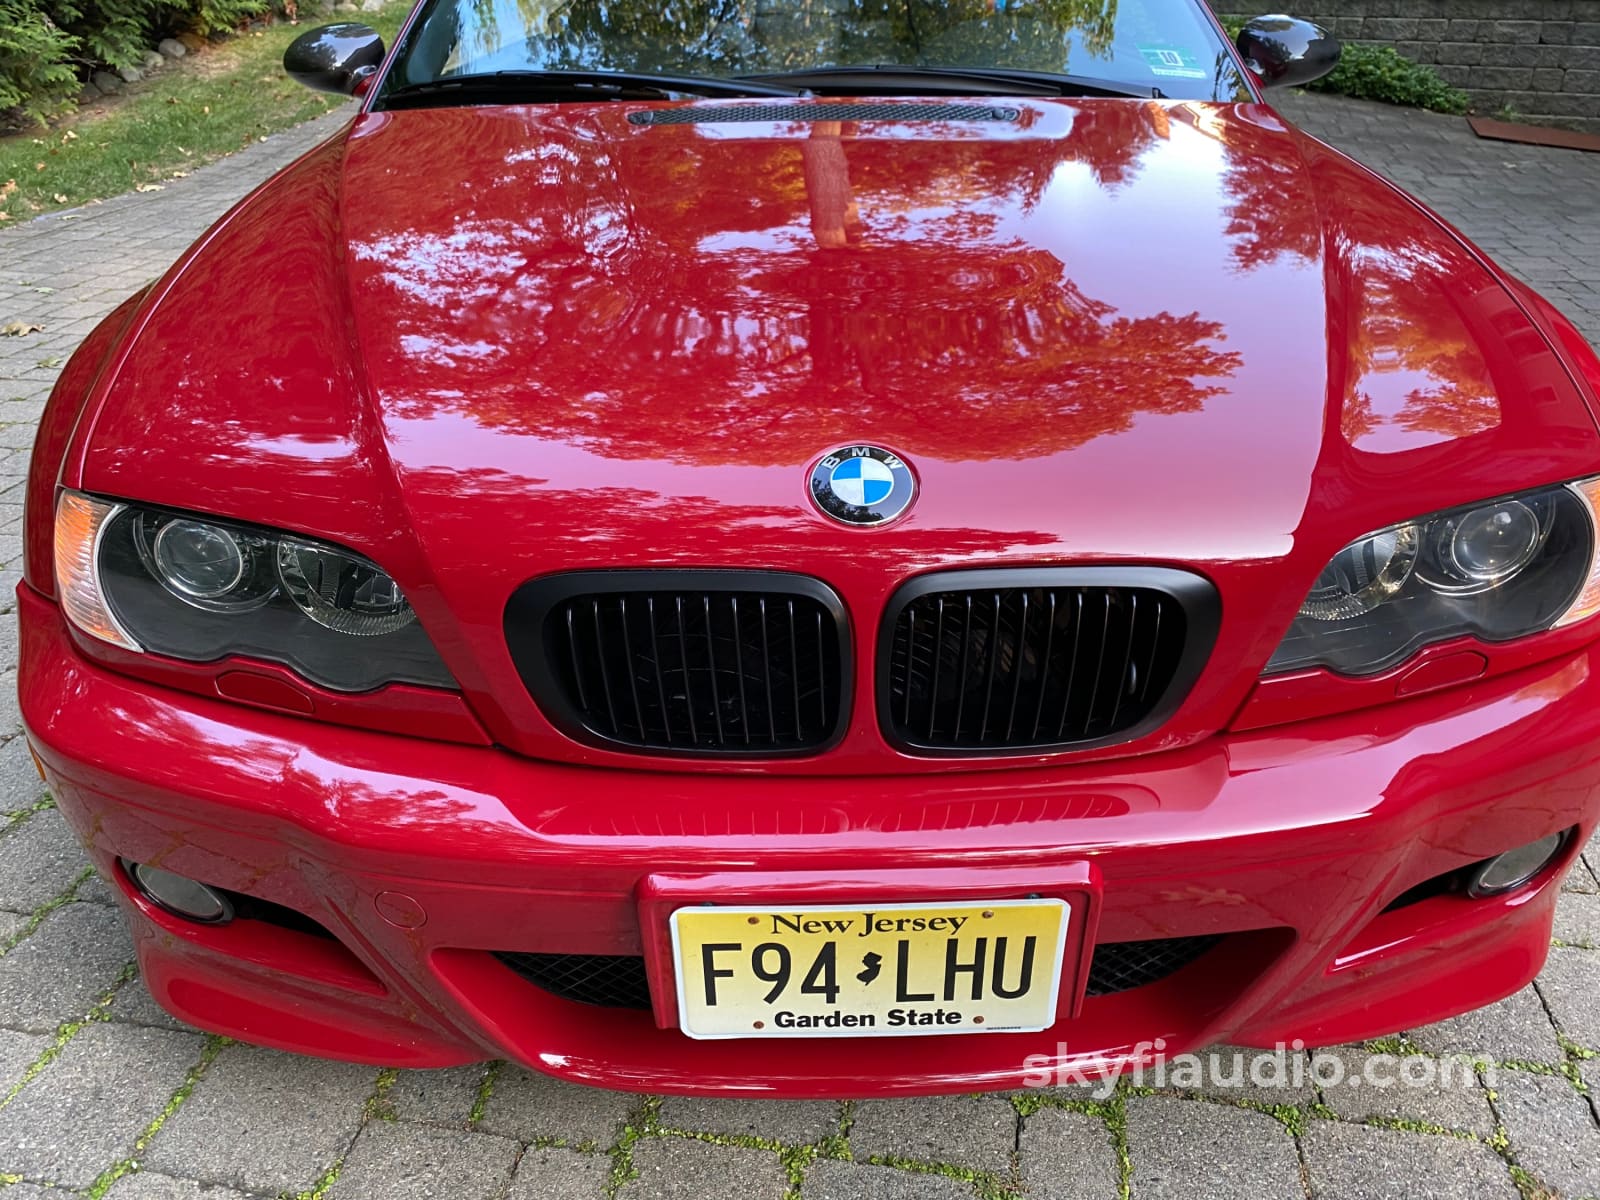 2006 Bmw M3 E46 Convertible - 6 Speed Manual Low Miles Vehicle